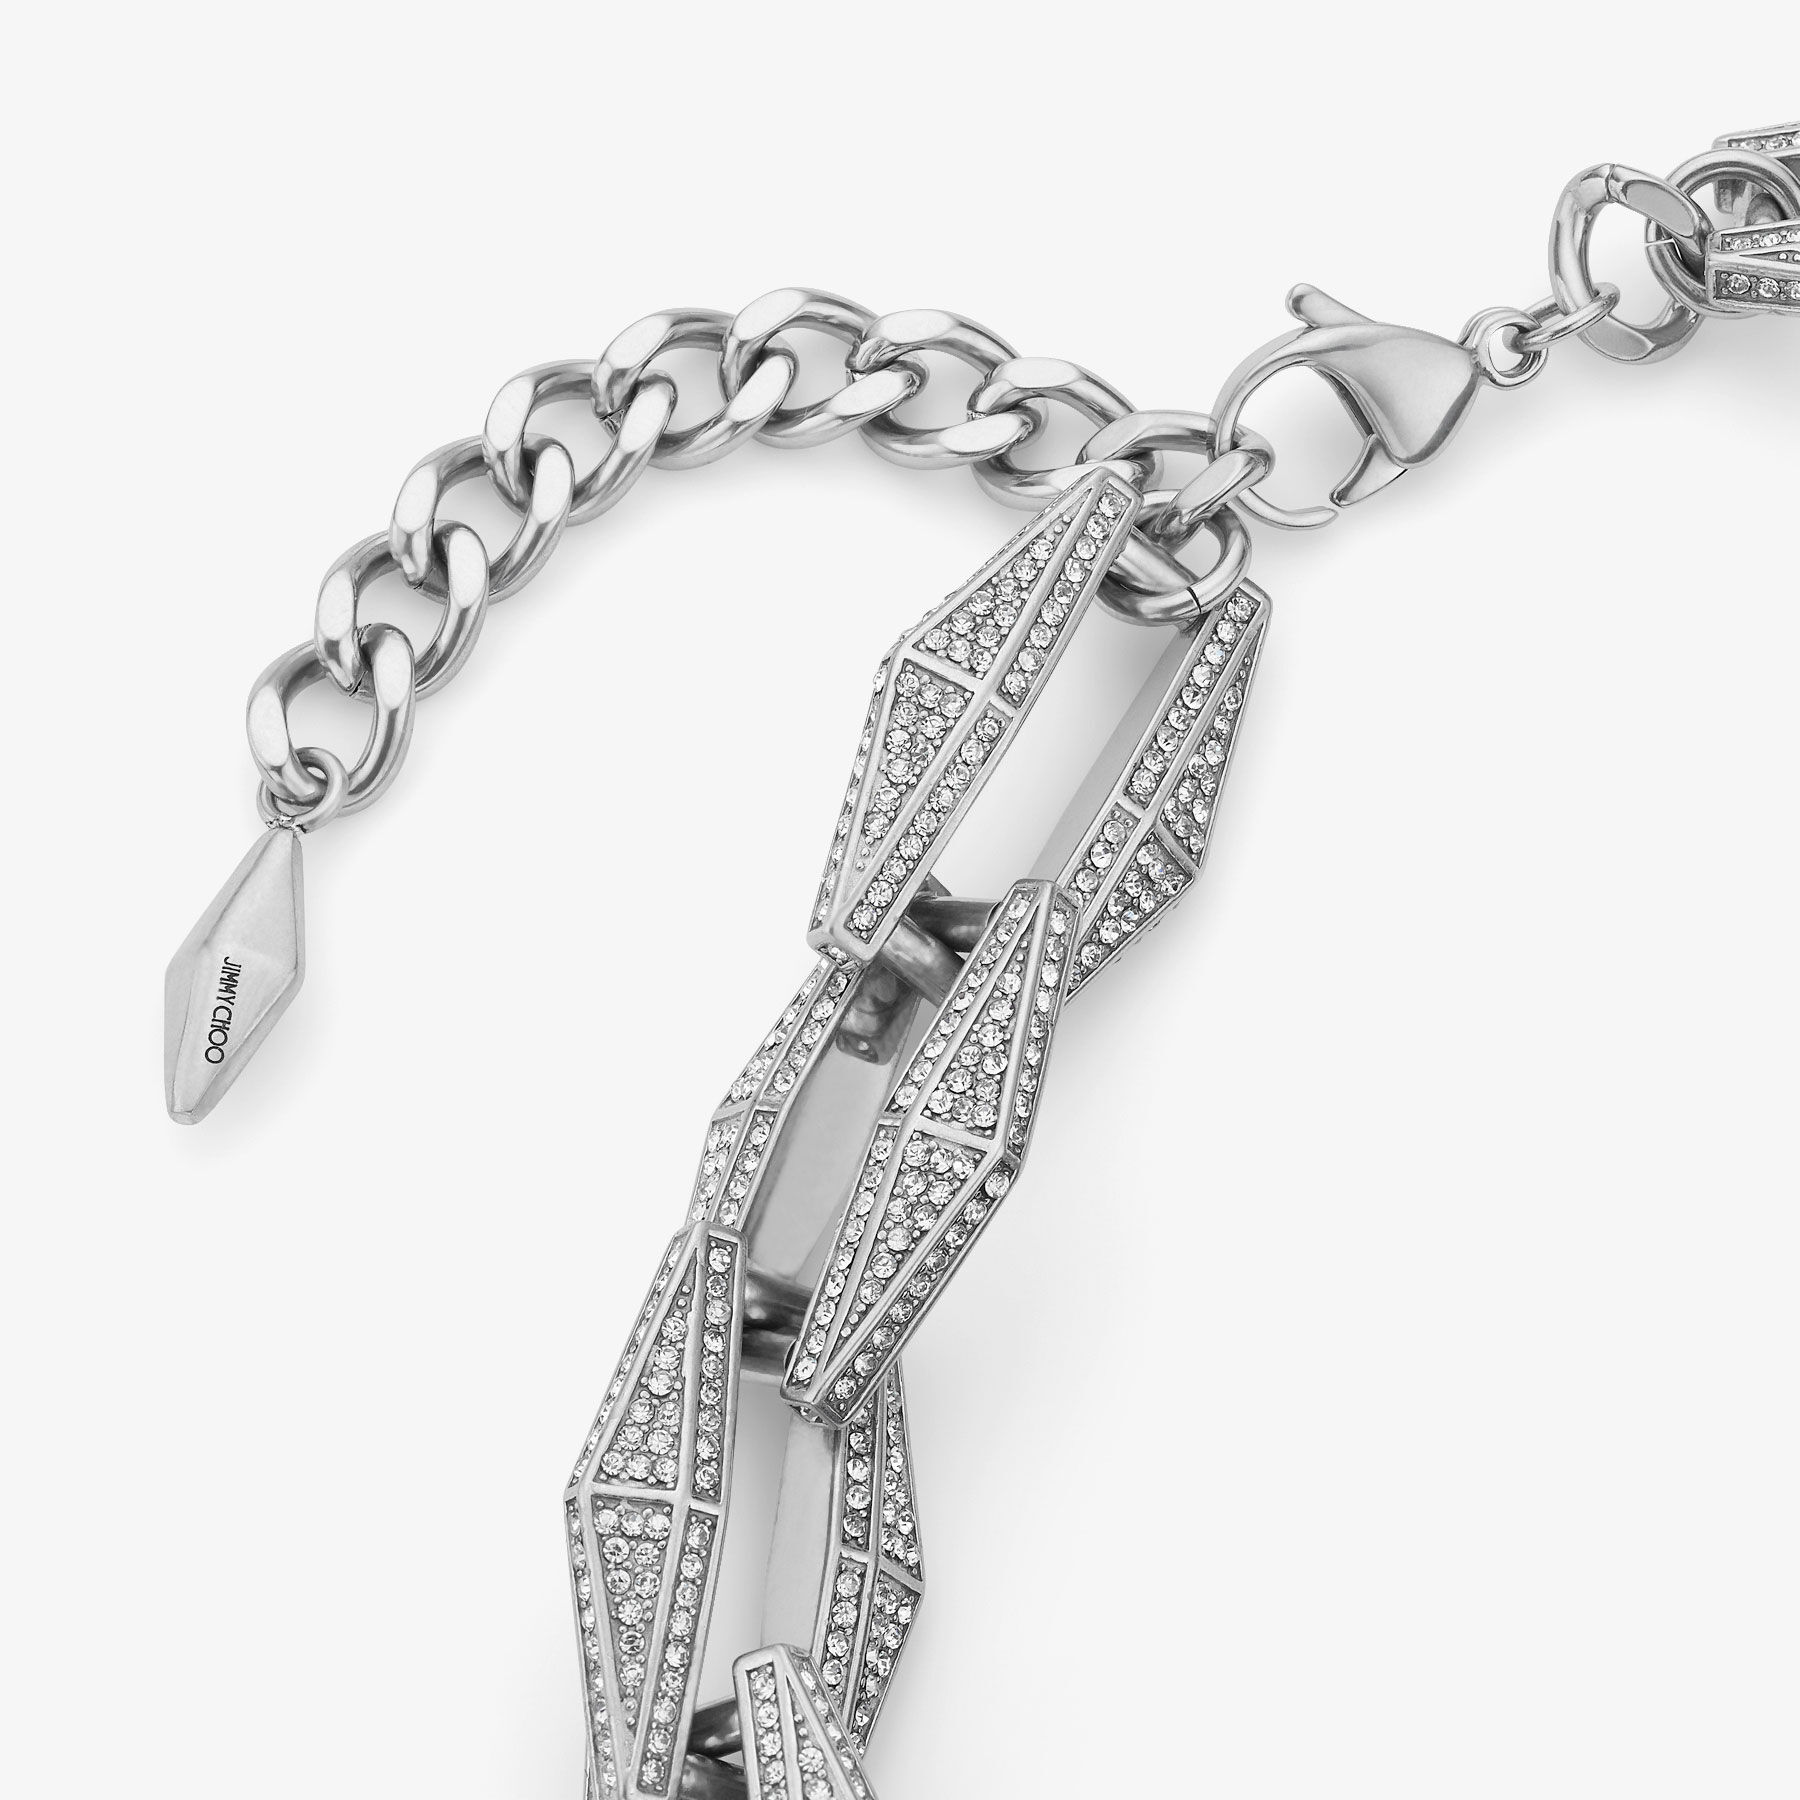 DIAMOND CHAIN NECKLACE  Silver-Finish Chain Necklace with Pave